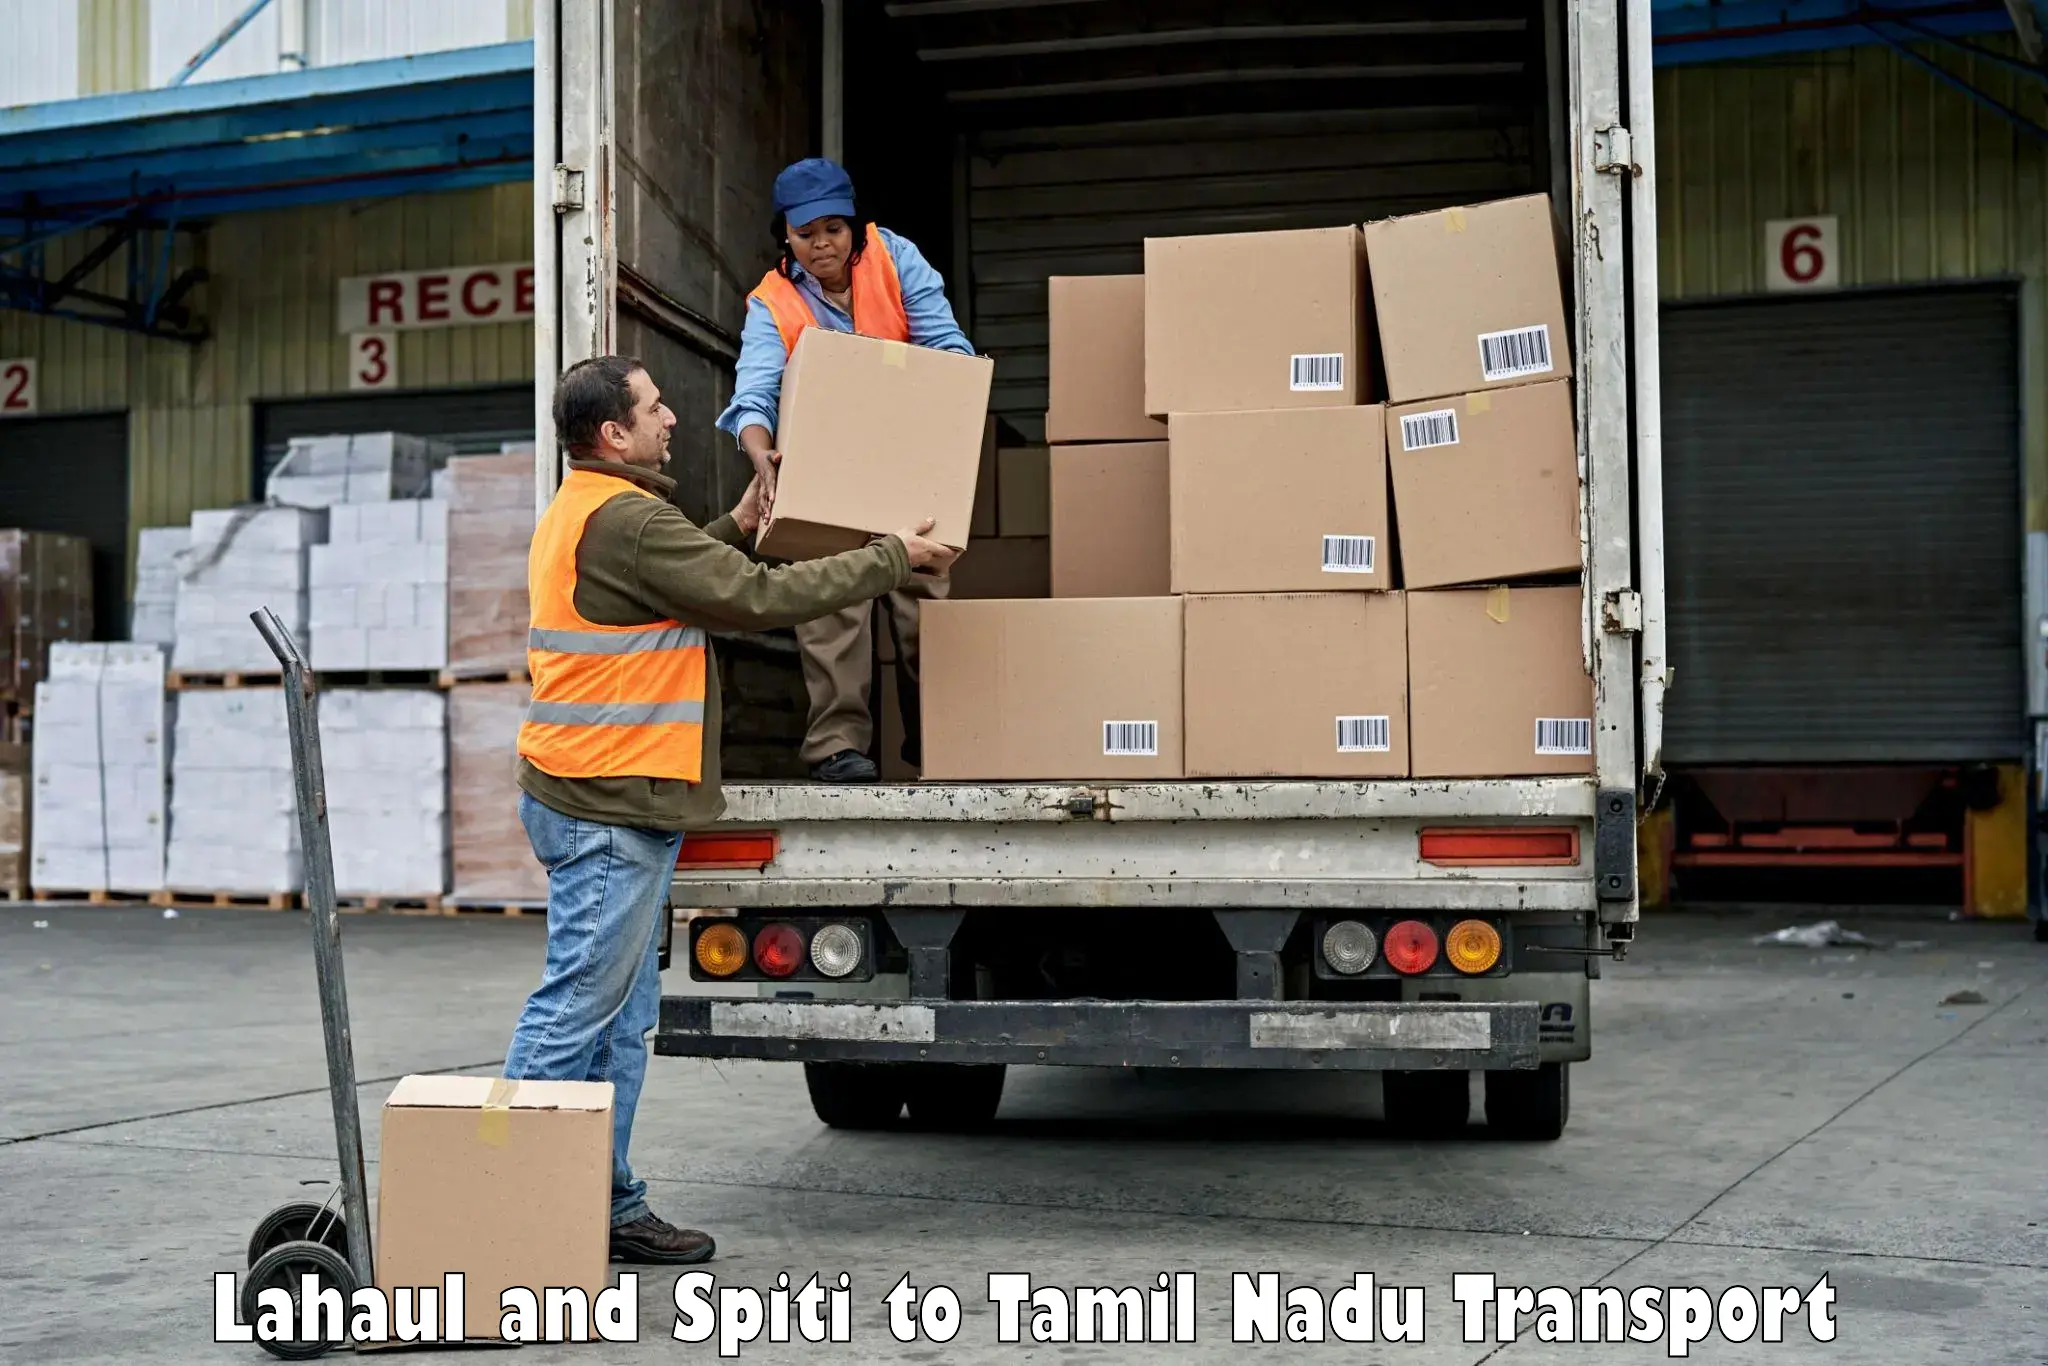 Lorry transport service Lahaul and Spiti to Vellore Institute of Technology